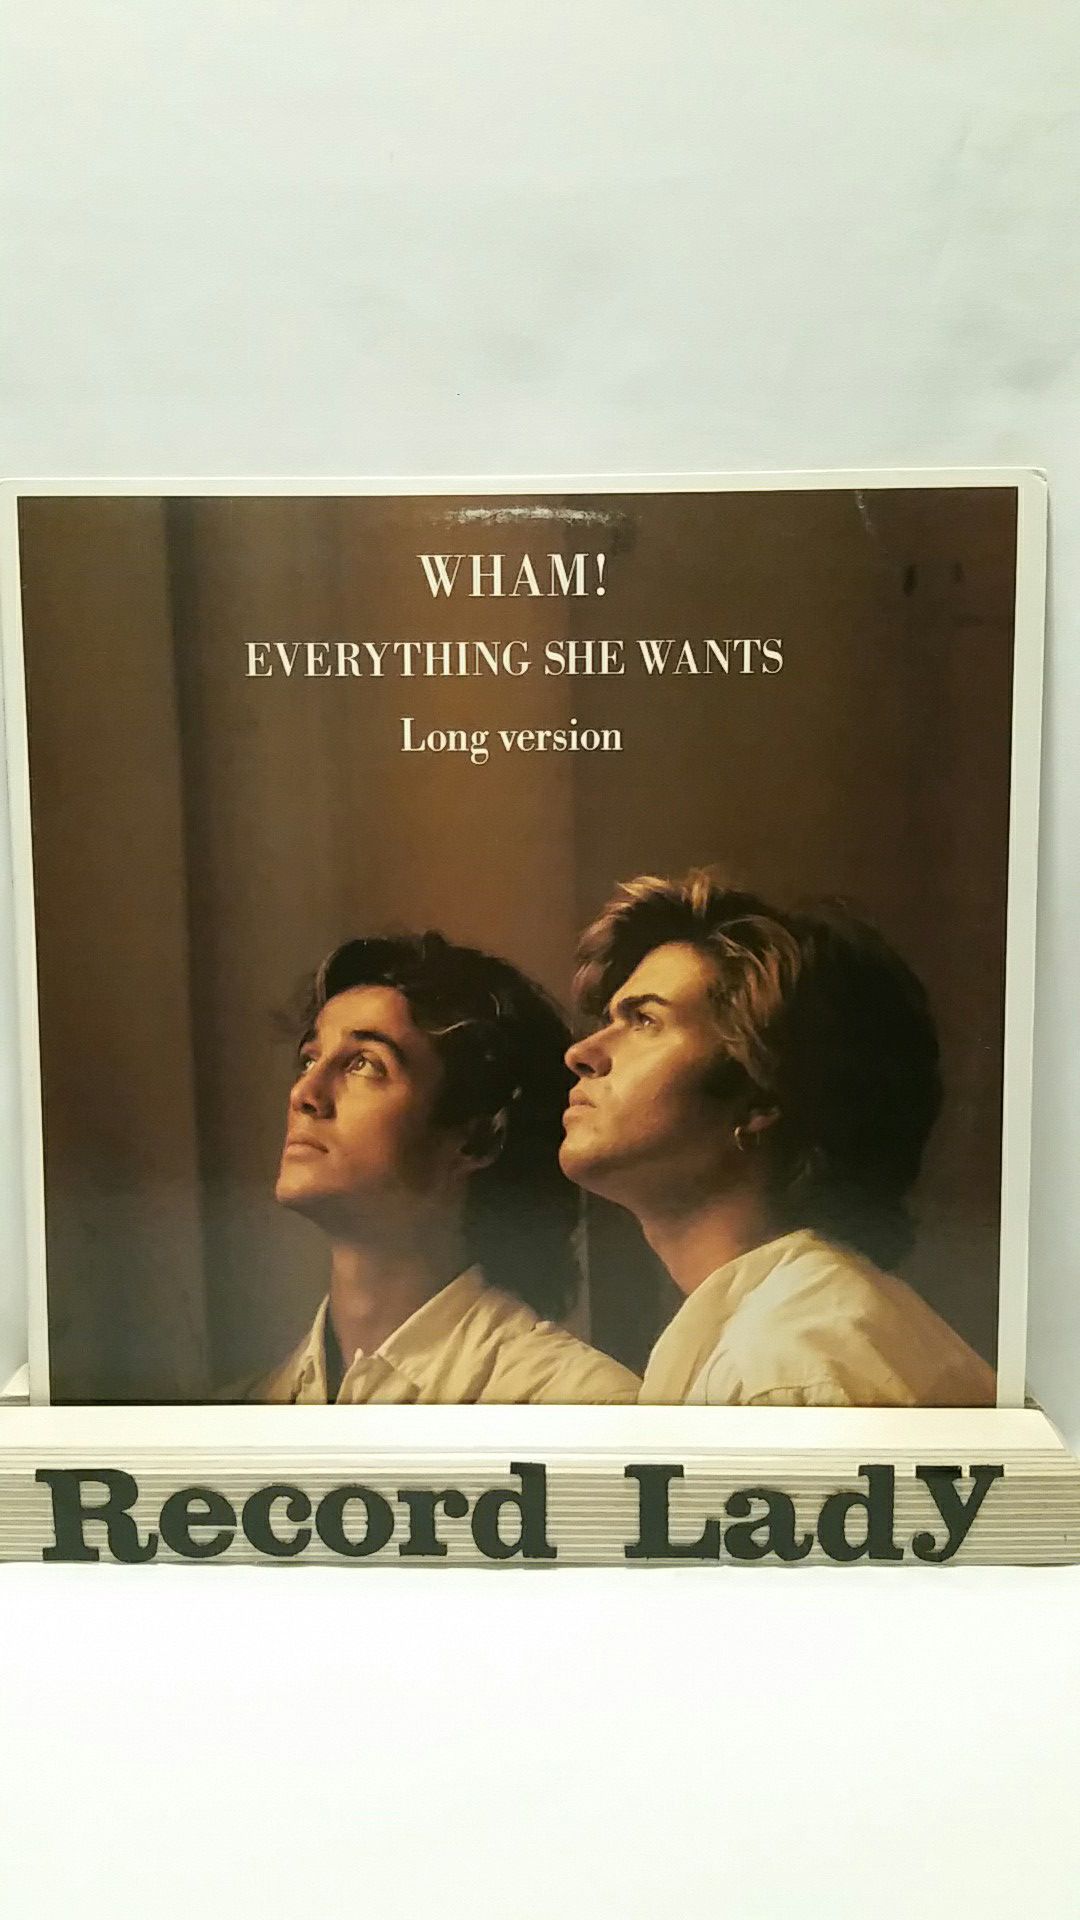 Wham! "Everything She Wants" vinyl records